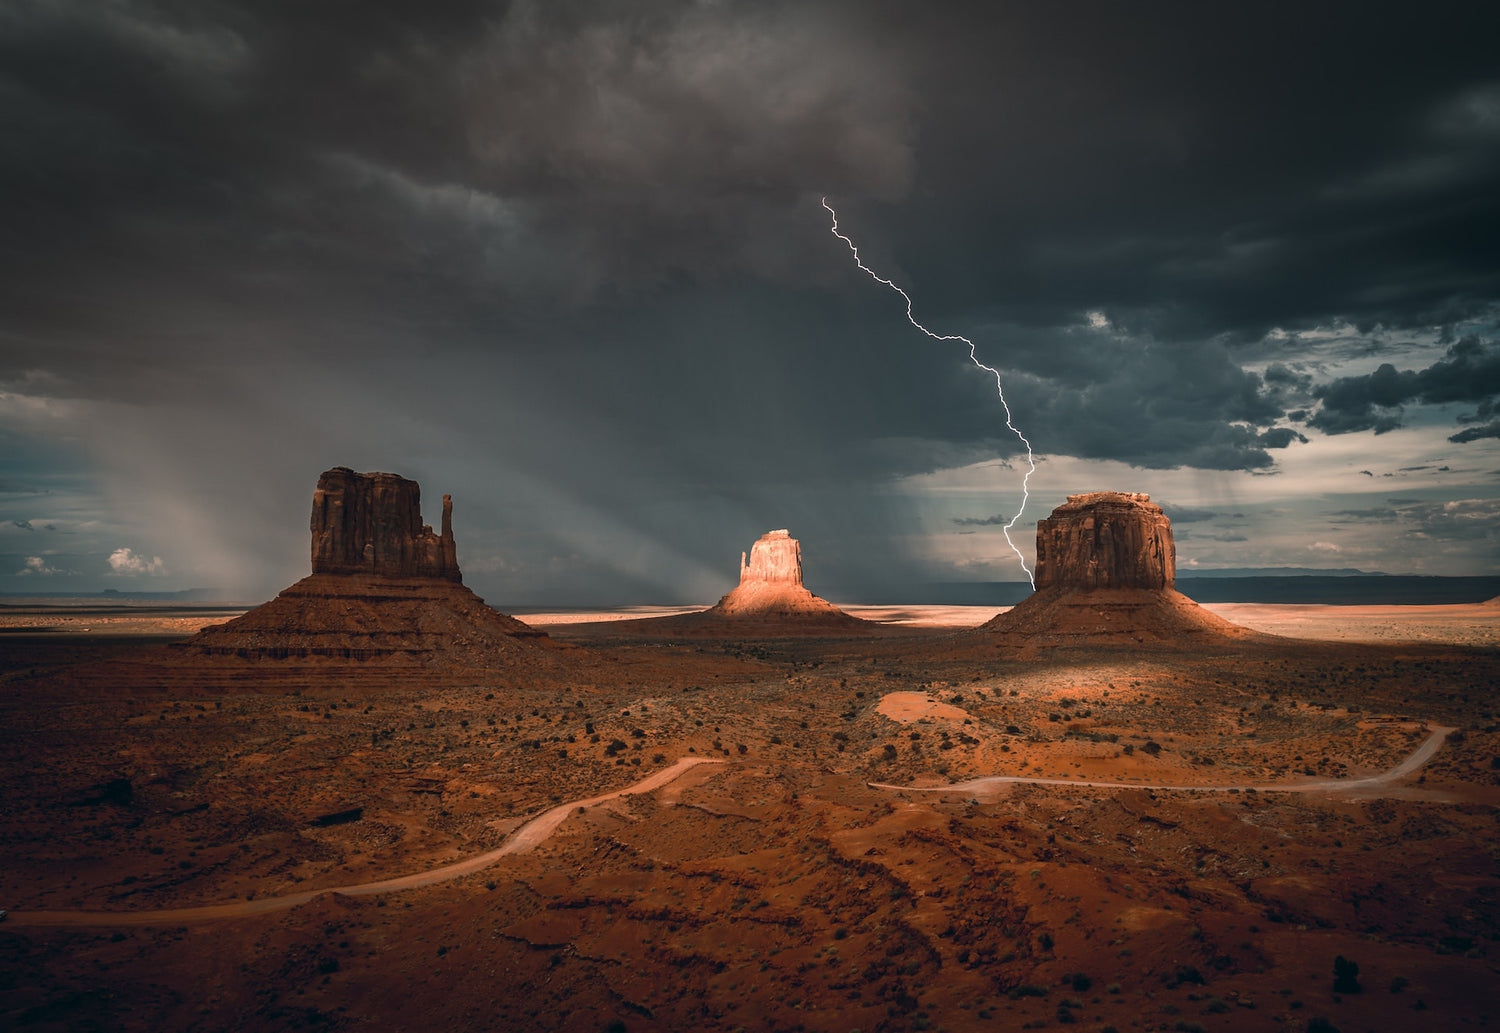 How to Photograph Lightning Using DSLR and Camera Trigger